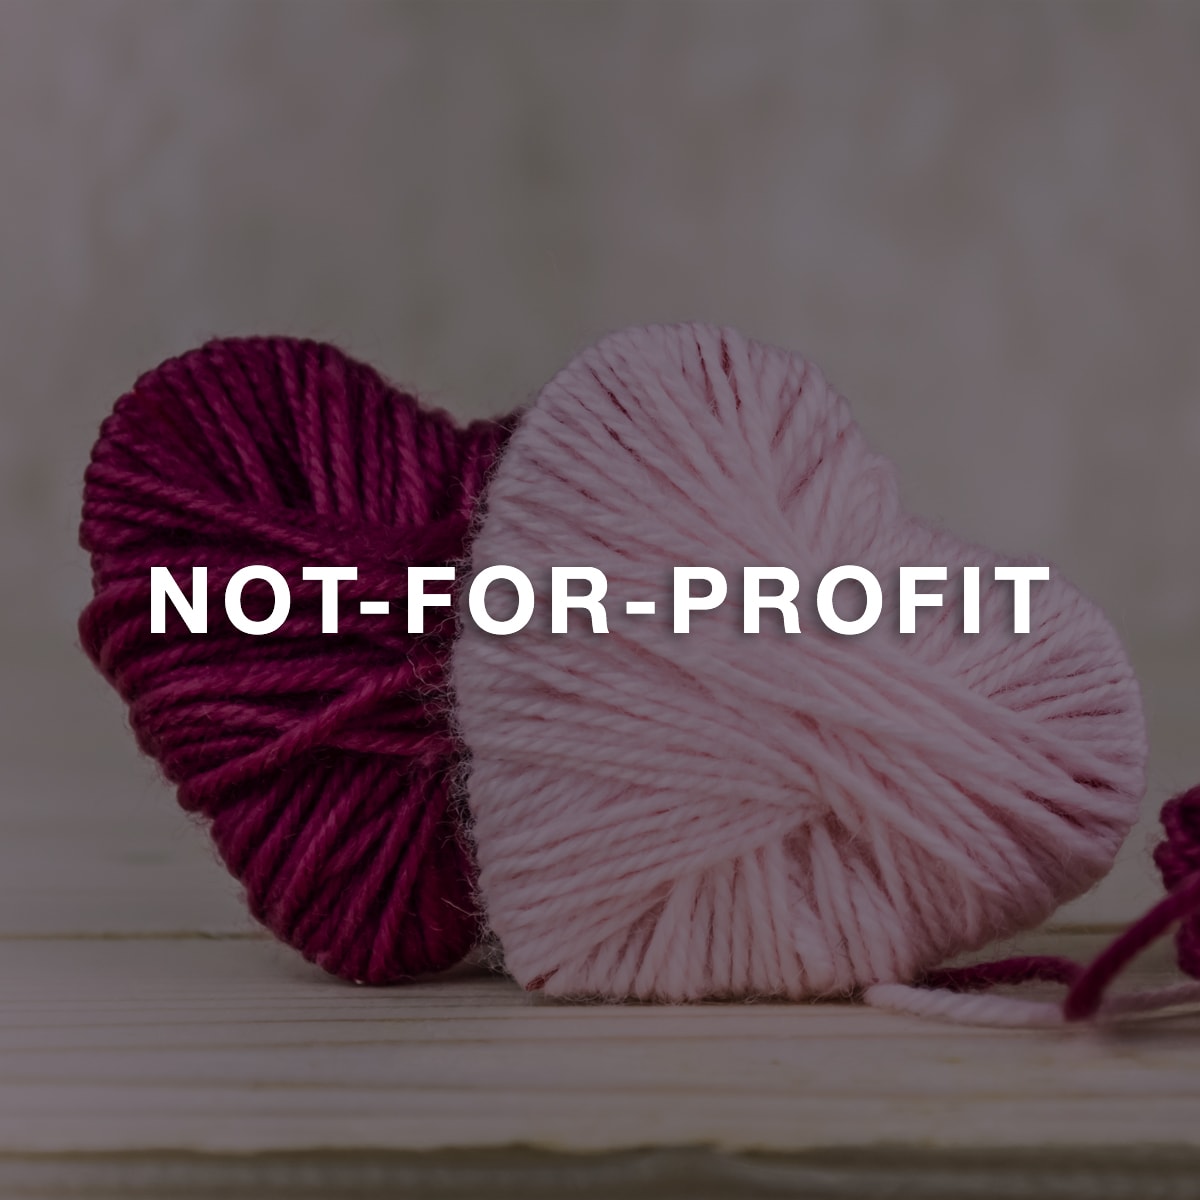 Not-for-profit